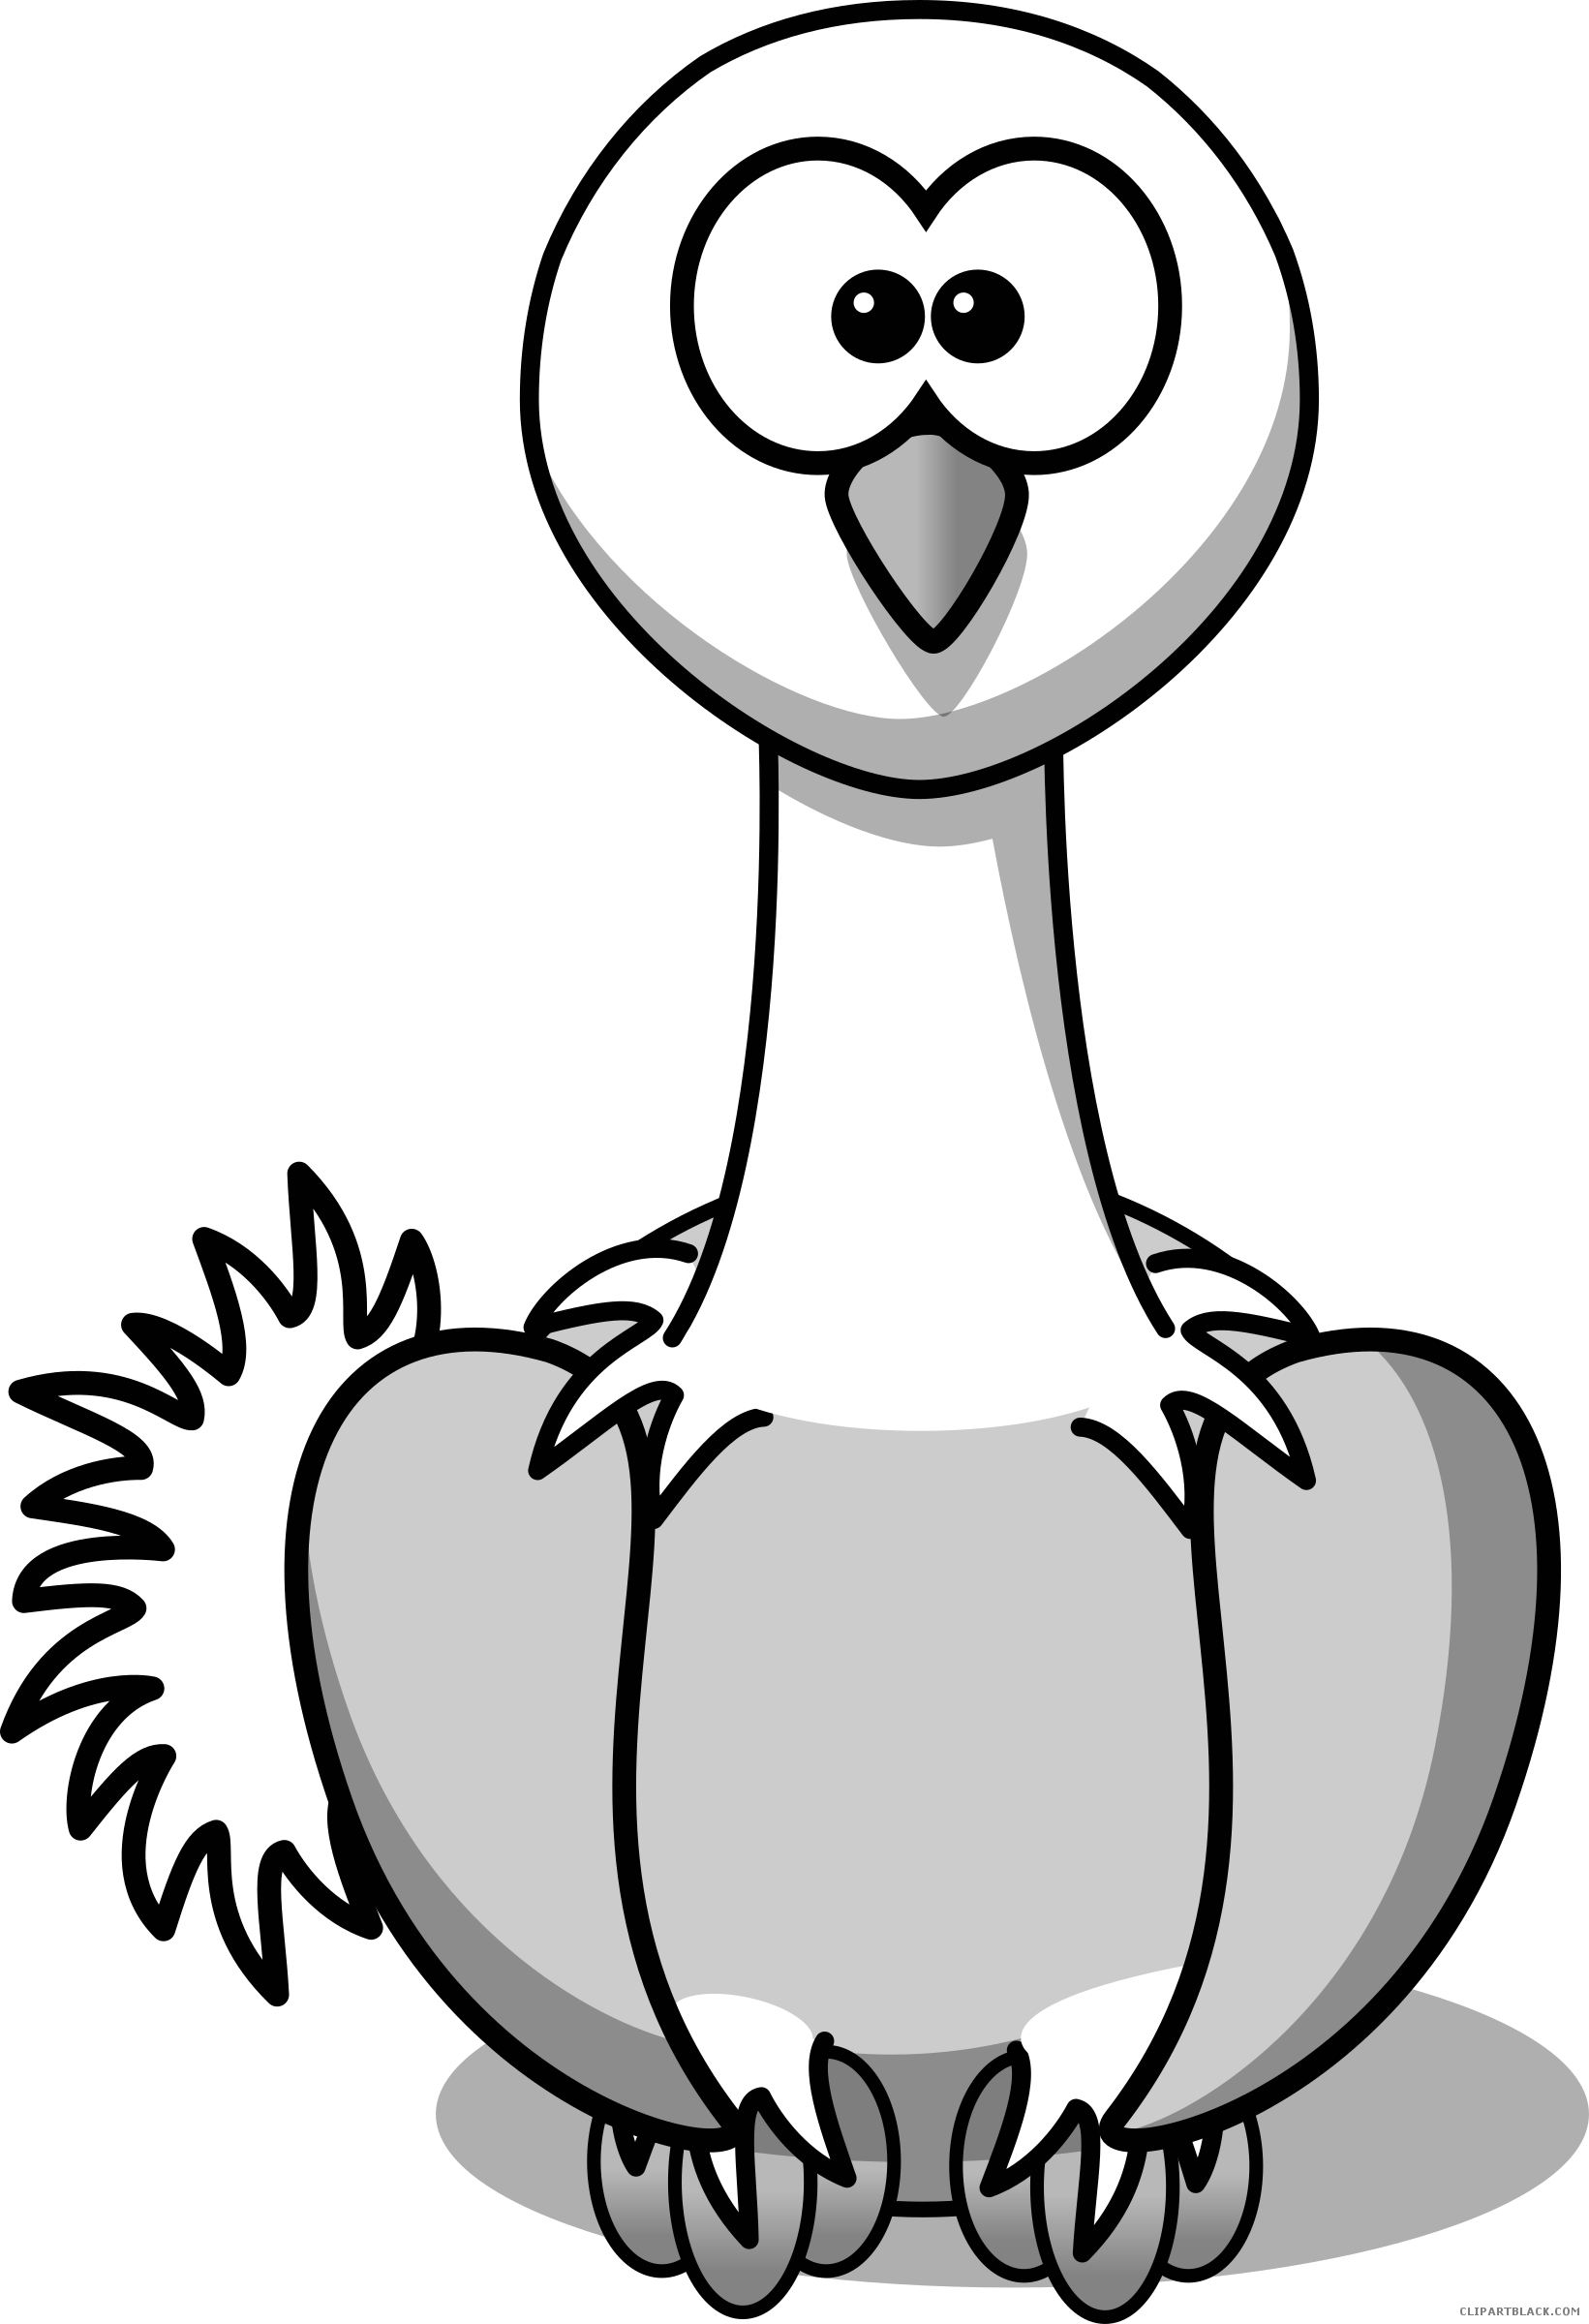 Ostrich Animal Free Black White Clipart Images Clipartblack - Cartoon Ostrich (1641x2400)